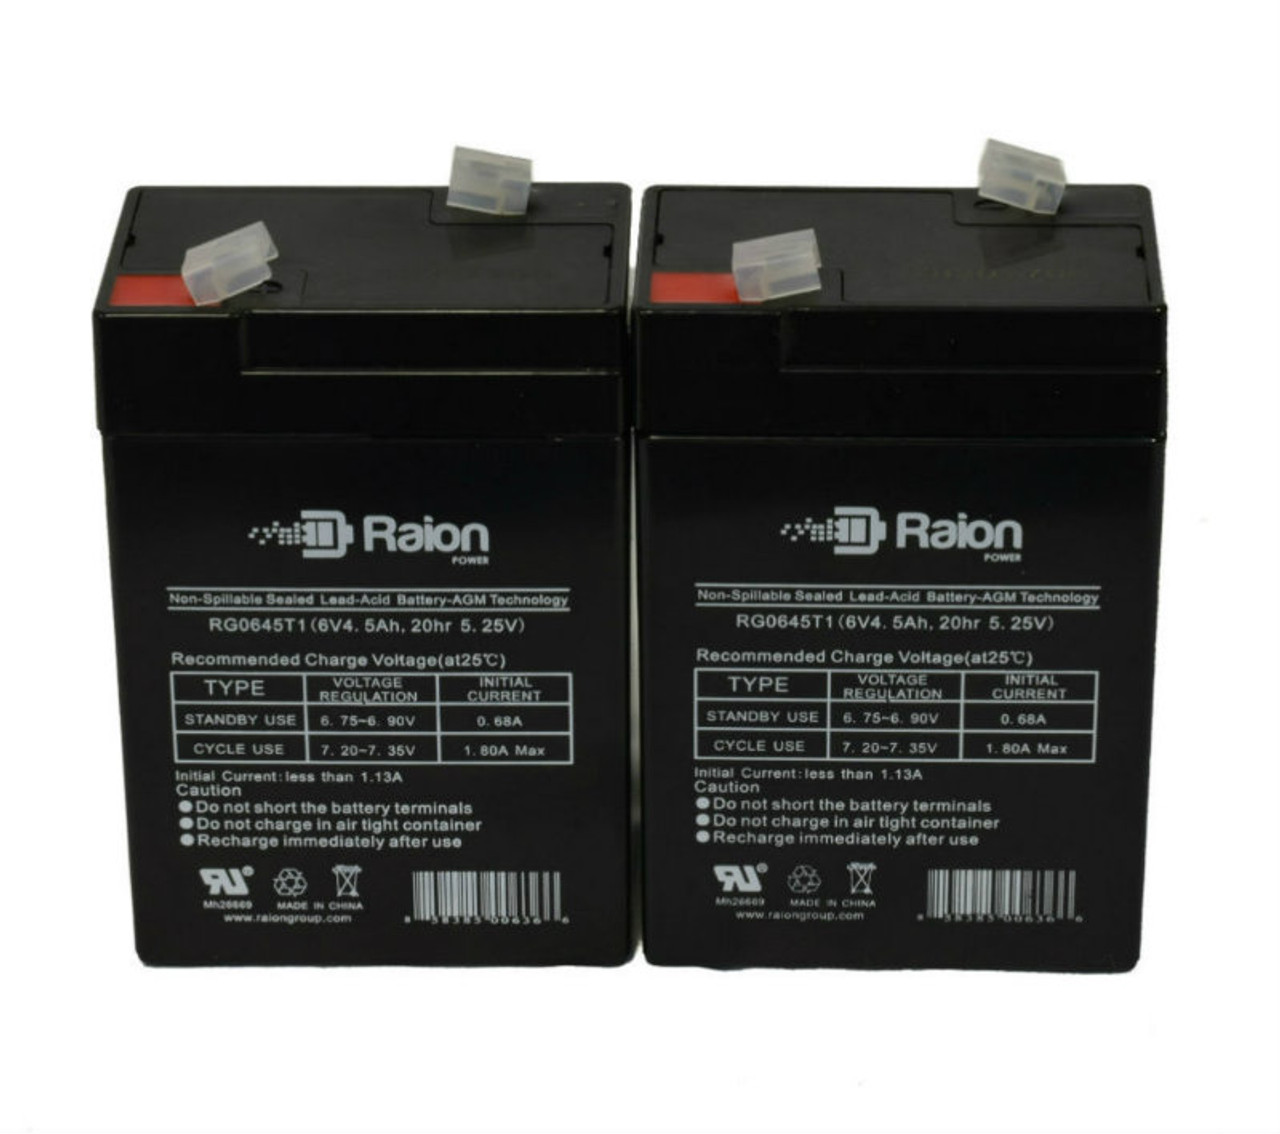 Raion Power 6V 4.5Ah Replacement Emergency Light Battery for National Power Corporation GS012PS - 2 Pack